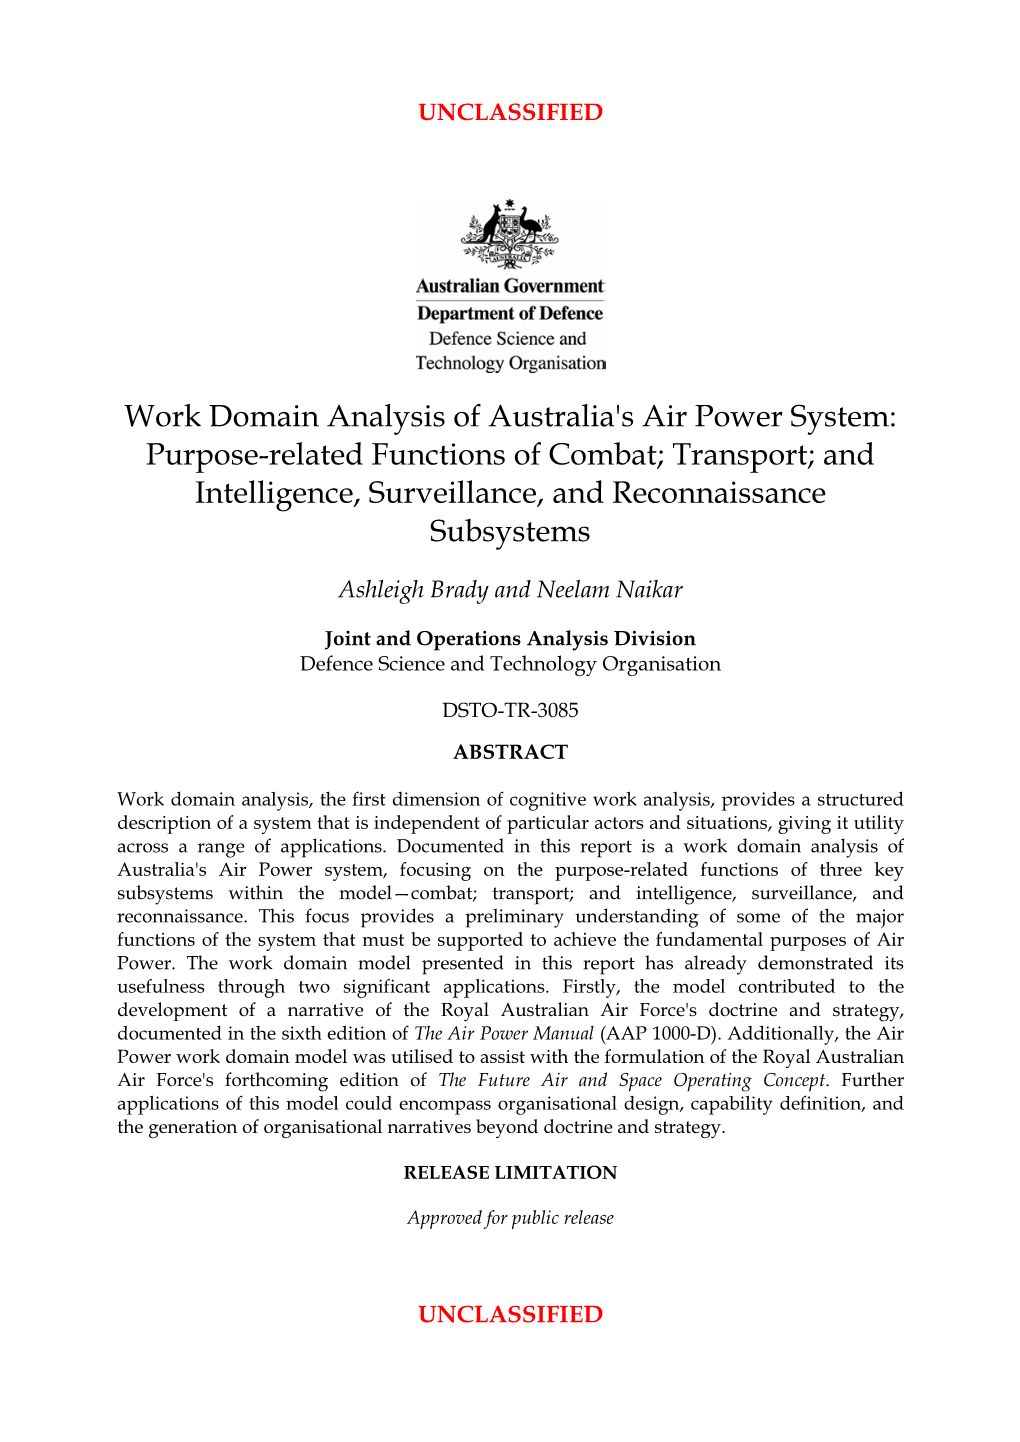 Work Domain Analysis of Australia's Air Power System: Purpose-Related Functions of Combat; Transport; and Intelligence, Surveillance, and Reconnaissance Subsystems